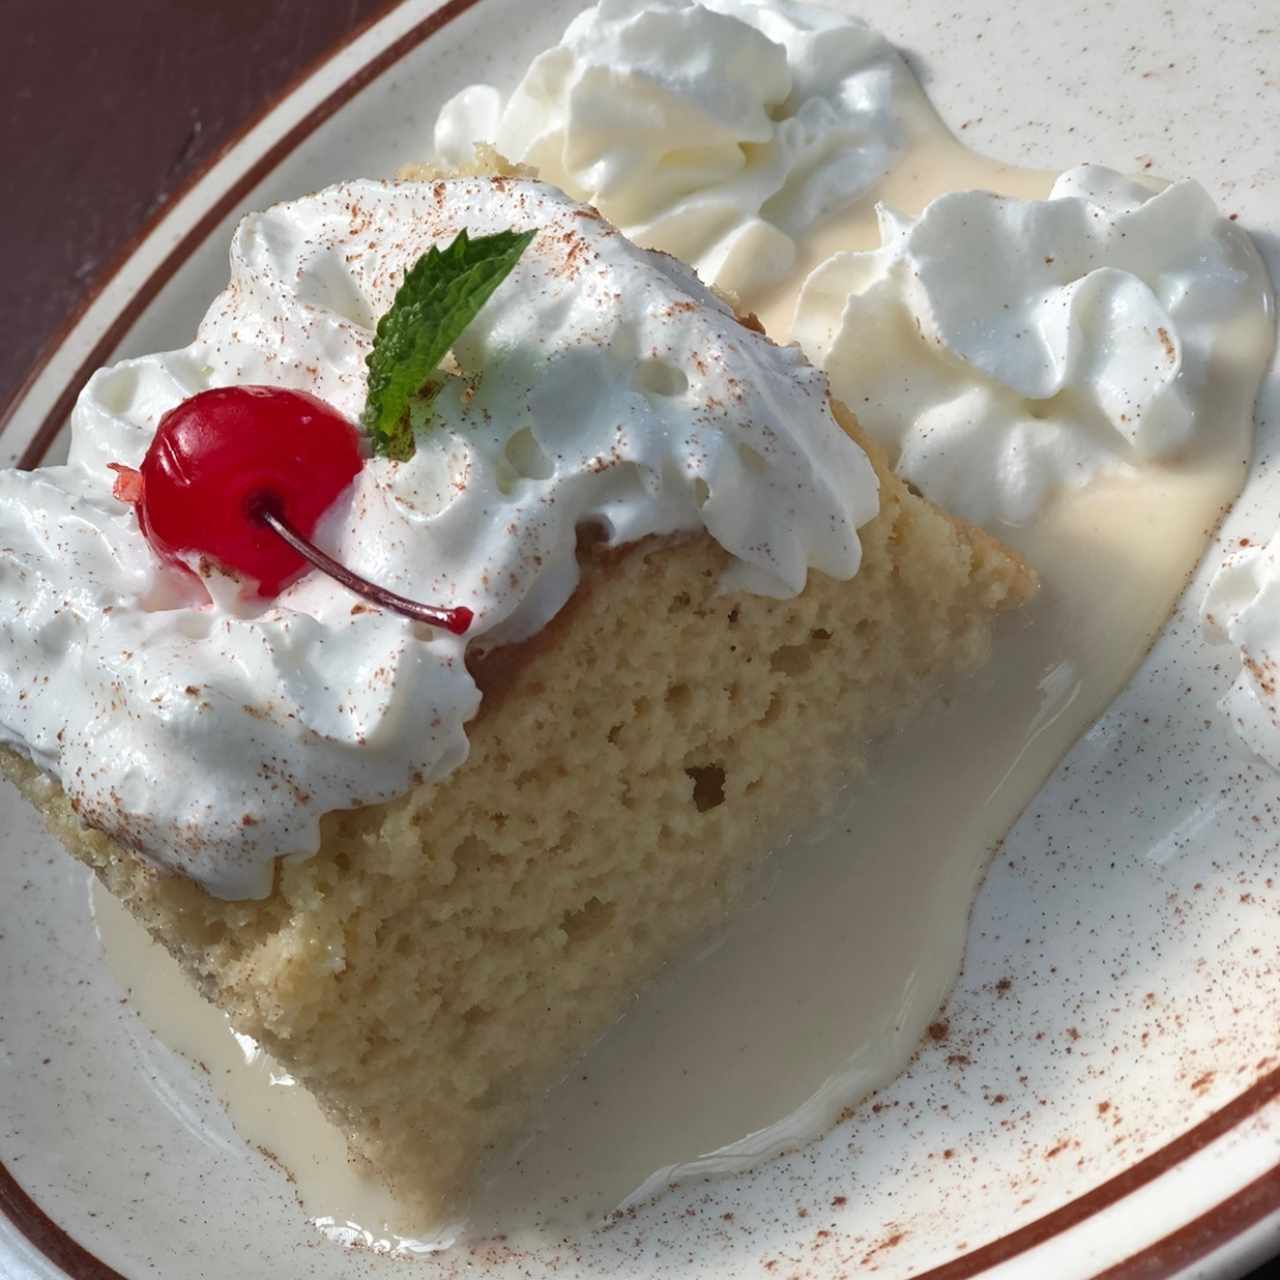 Dulce tres leches